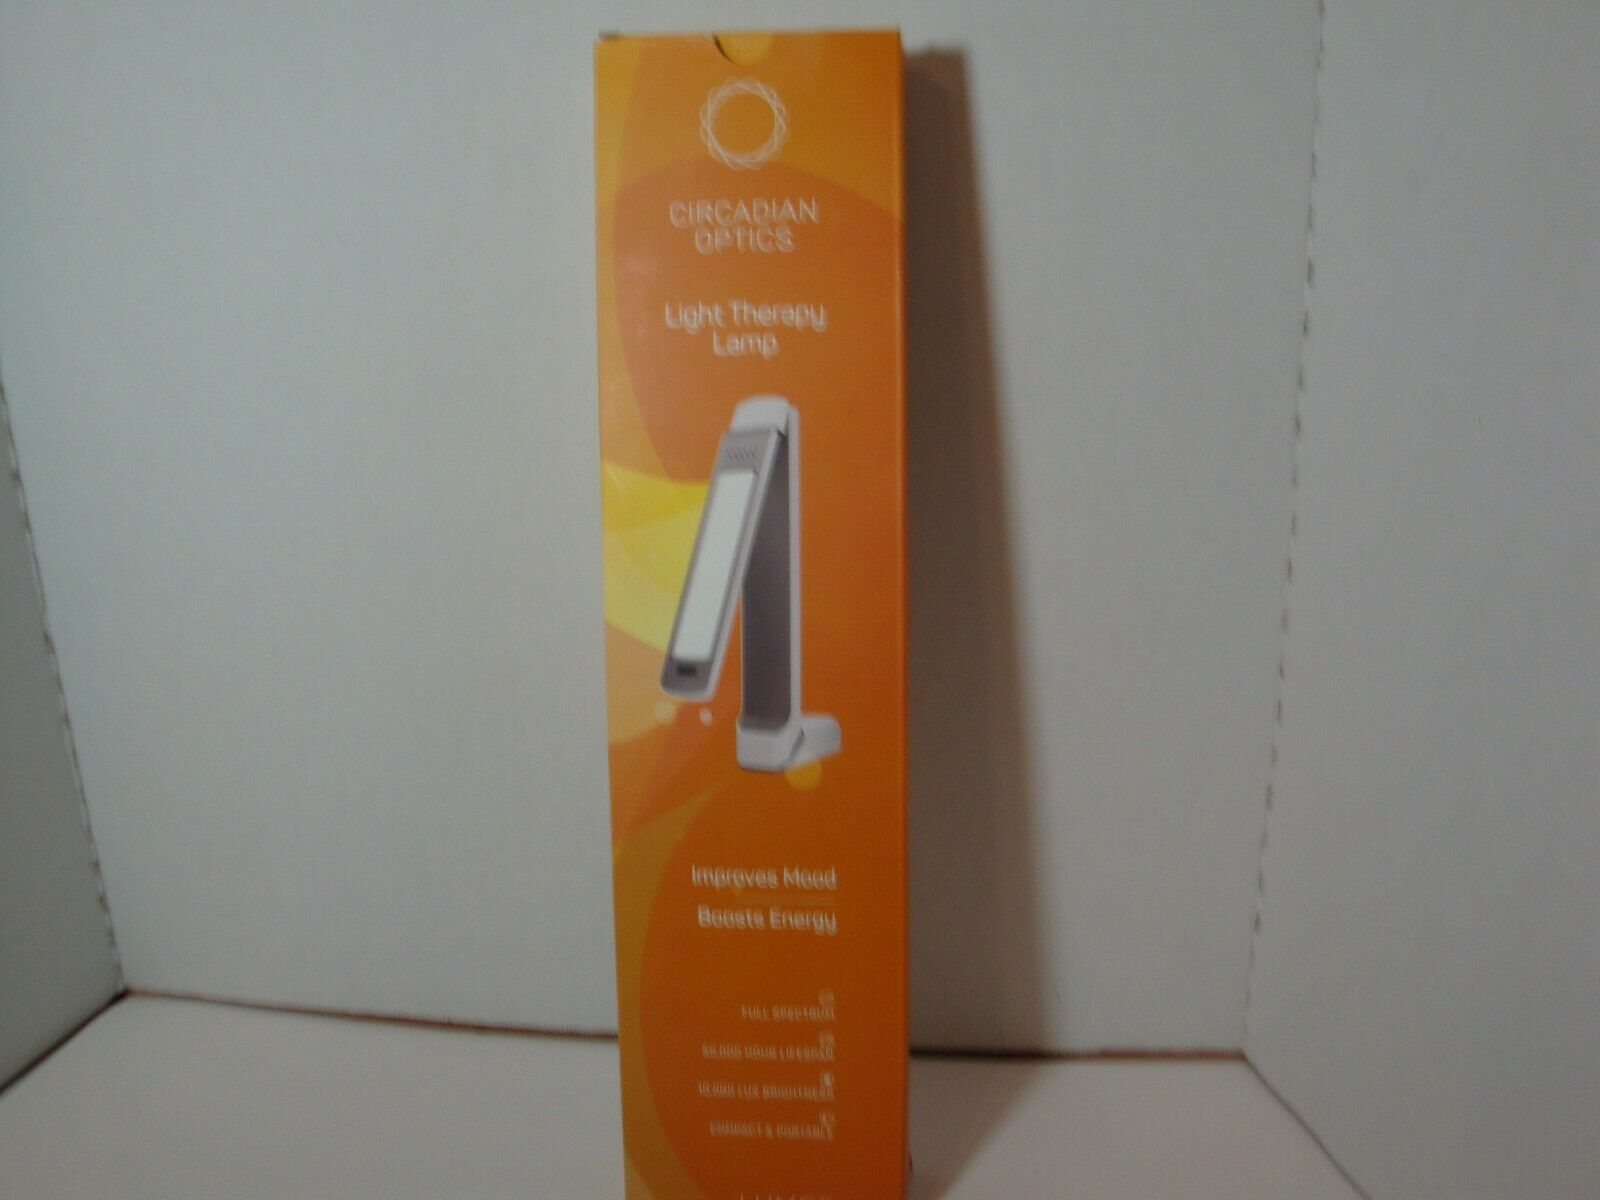 Circadian Optics Light Therapy Lamp 10000 Lux New In Box Full Spectrum within size 1600 X 1200